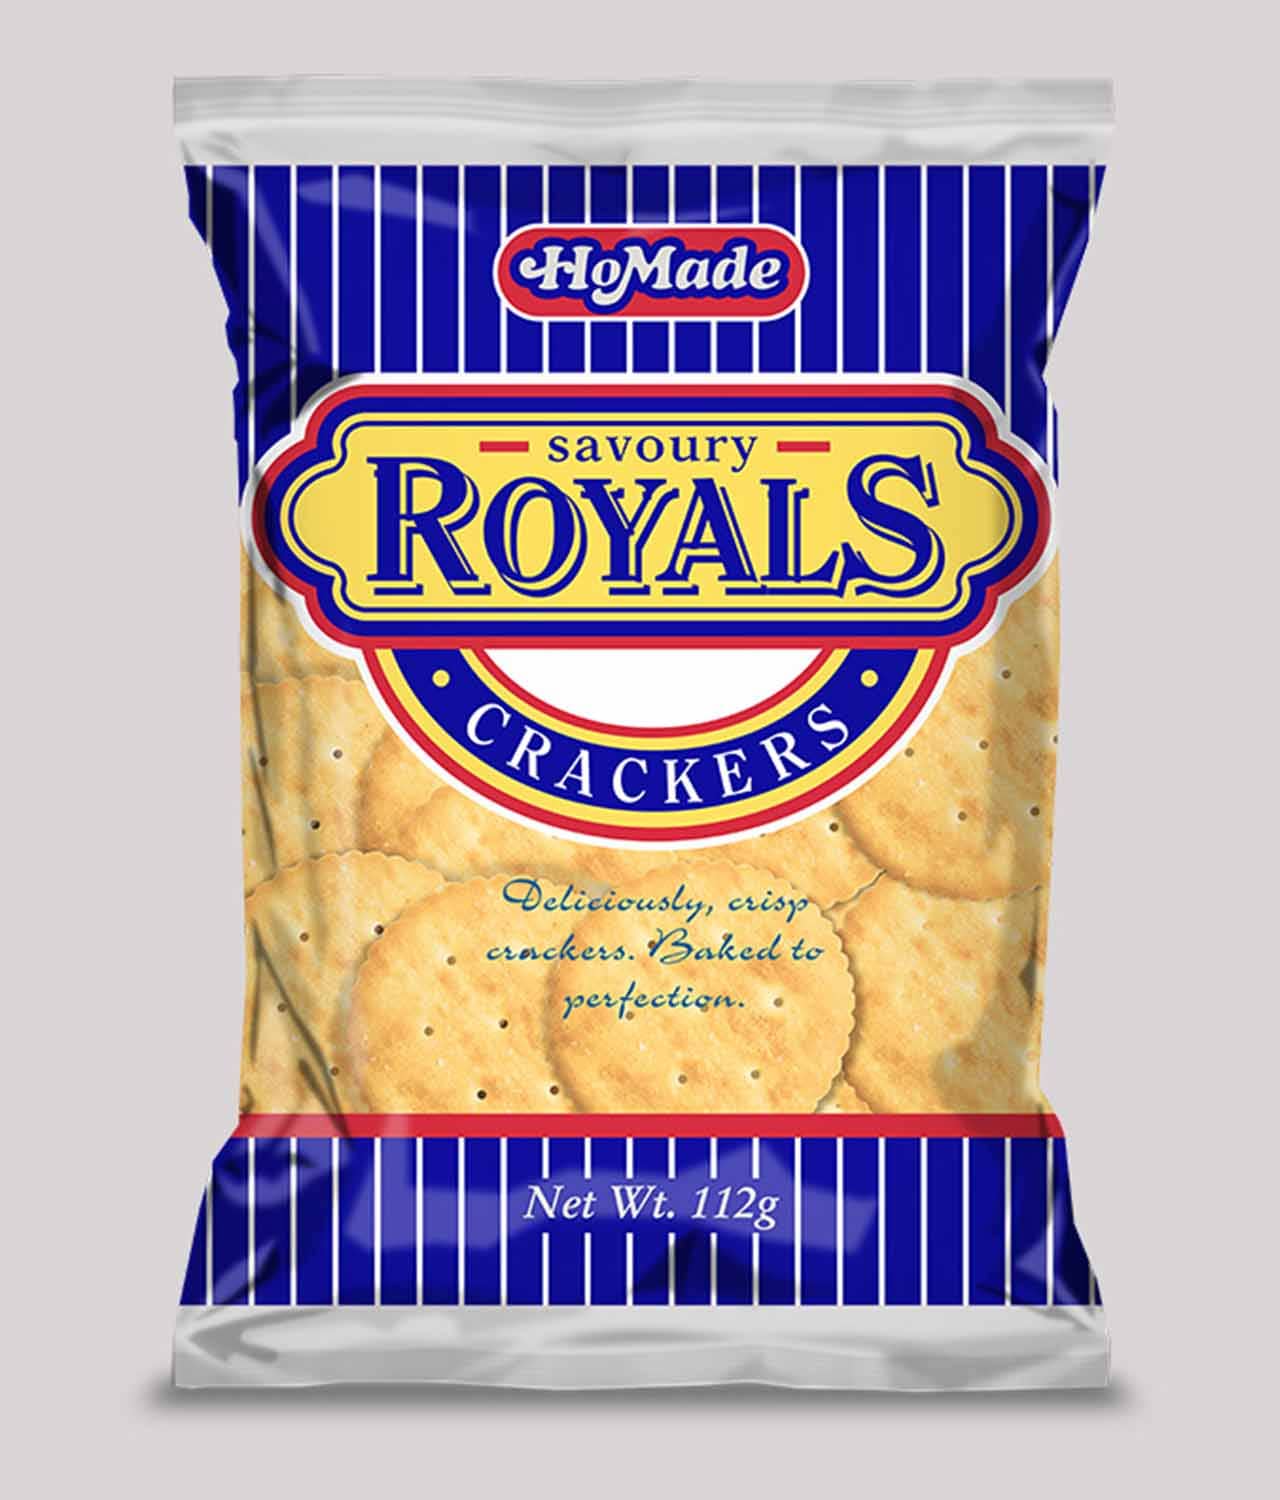 HoMade Royal  crackers case